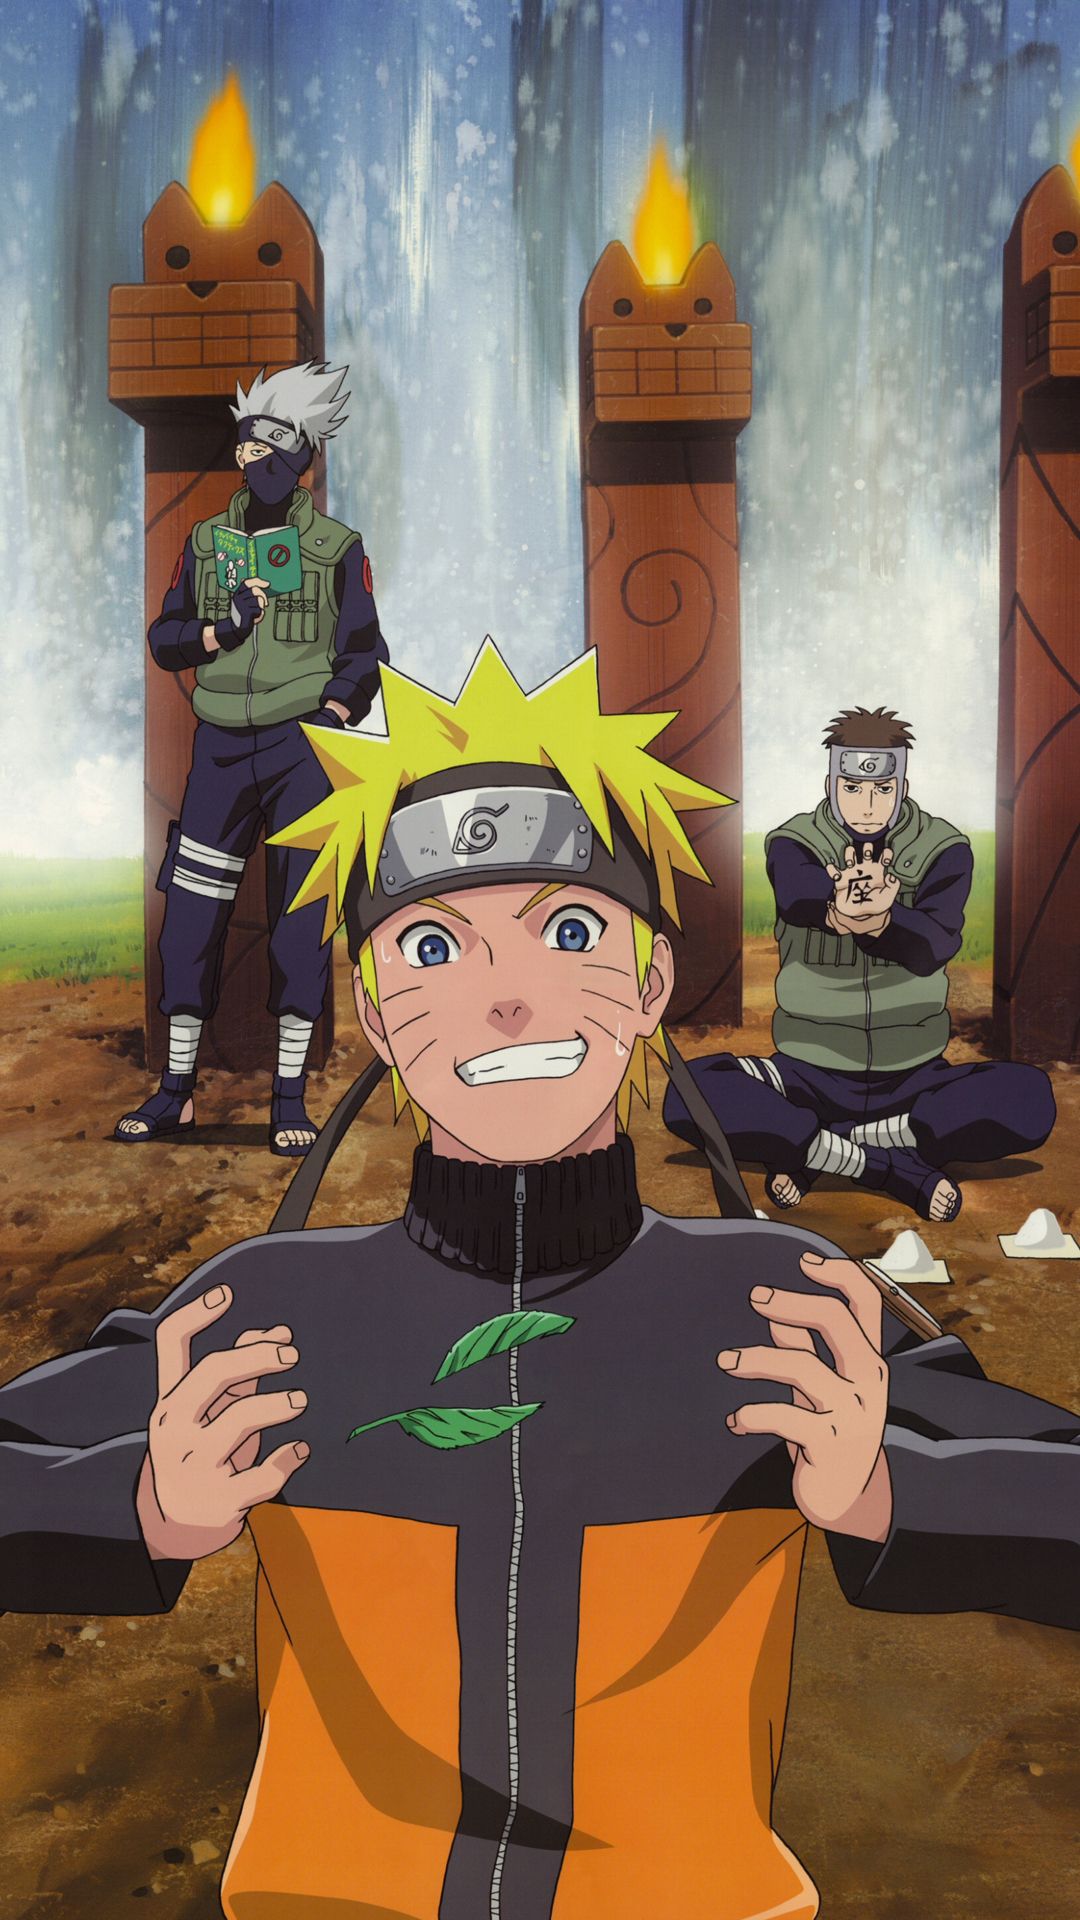 Naruto Shippuden htc one wallpaper, free and easy to download